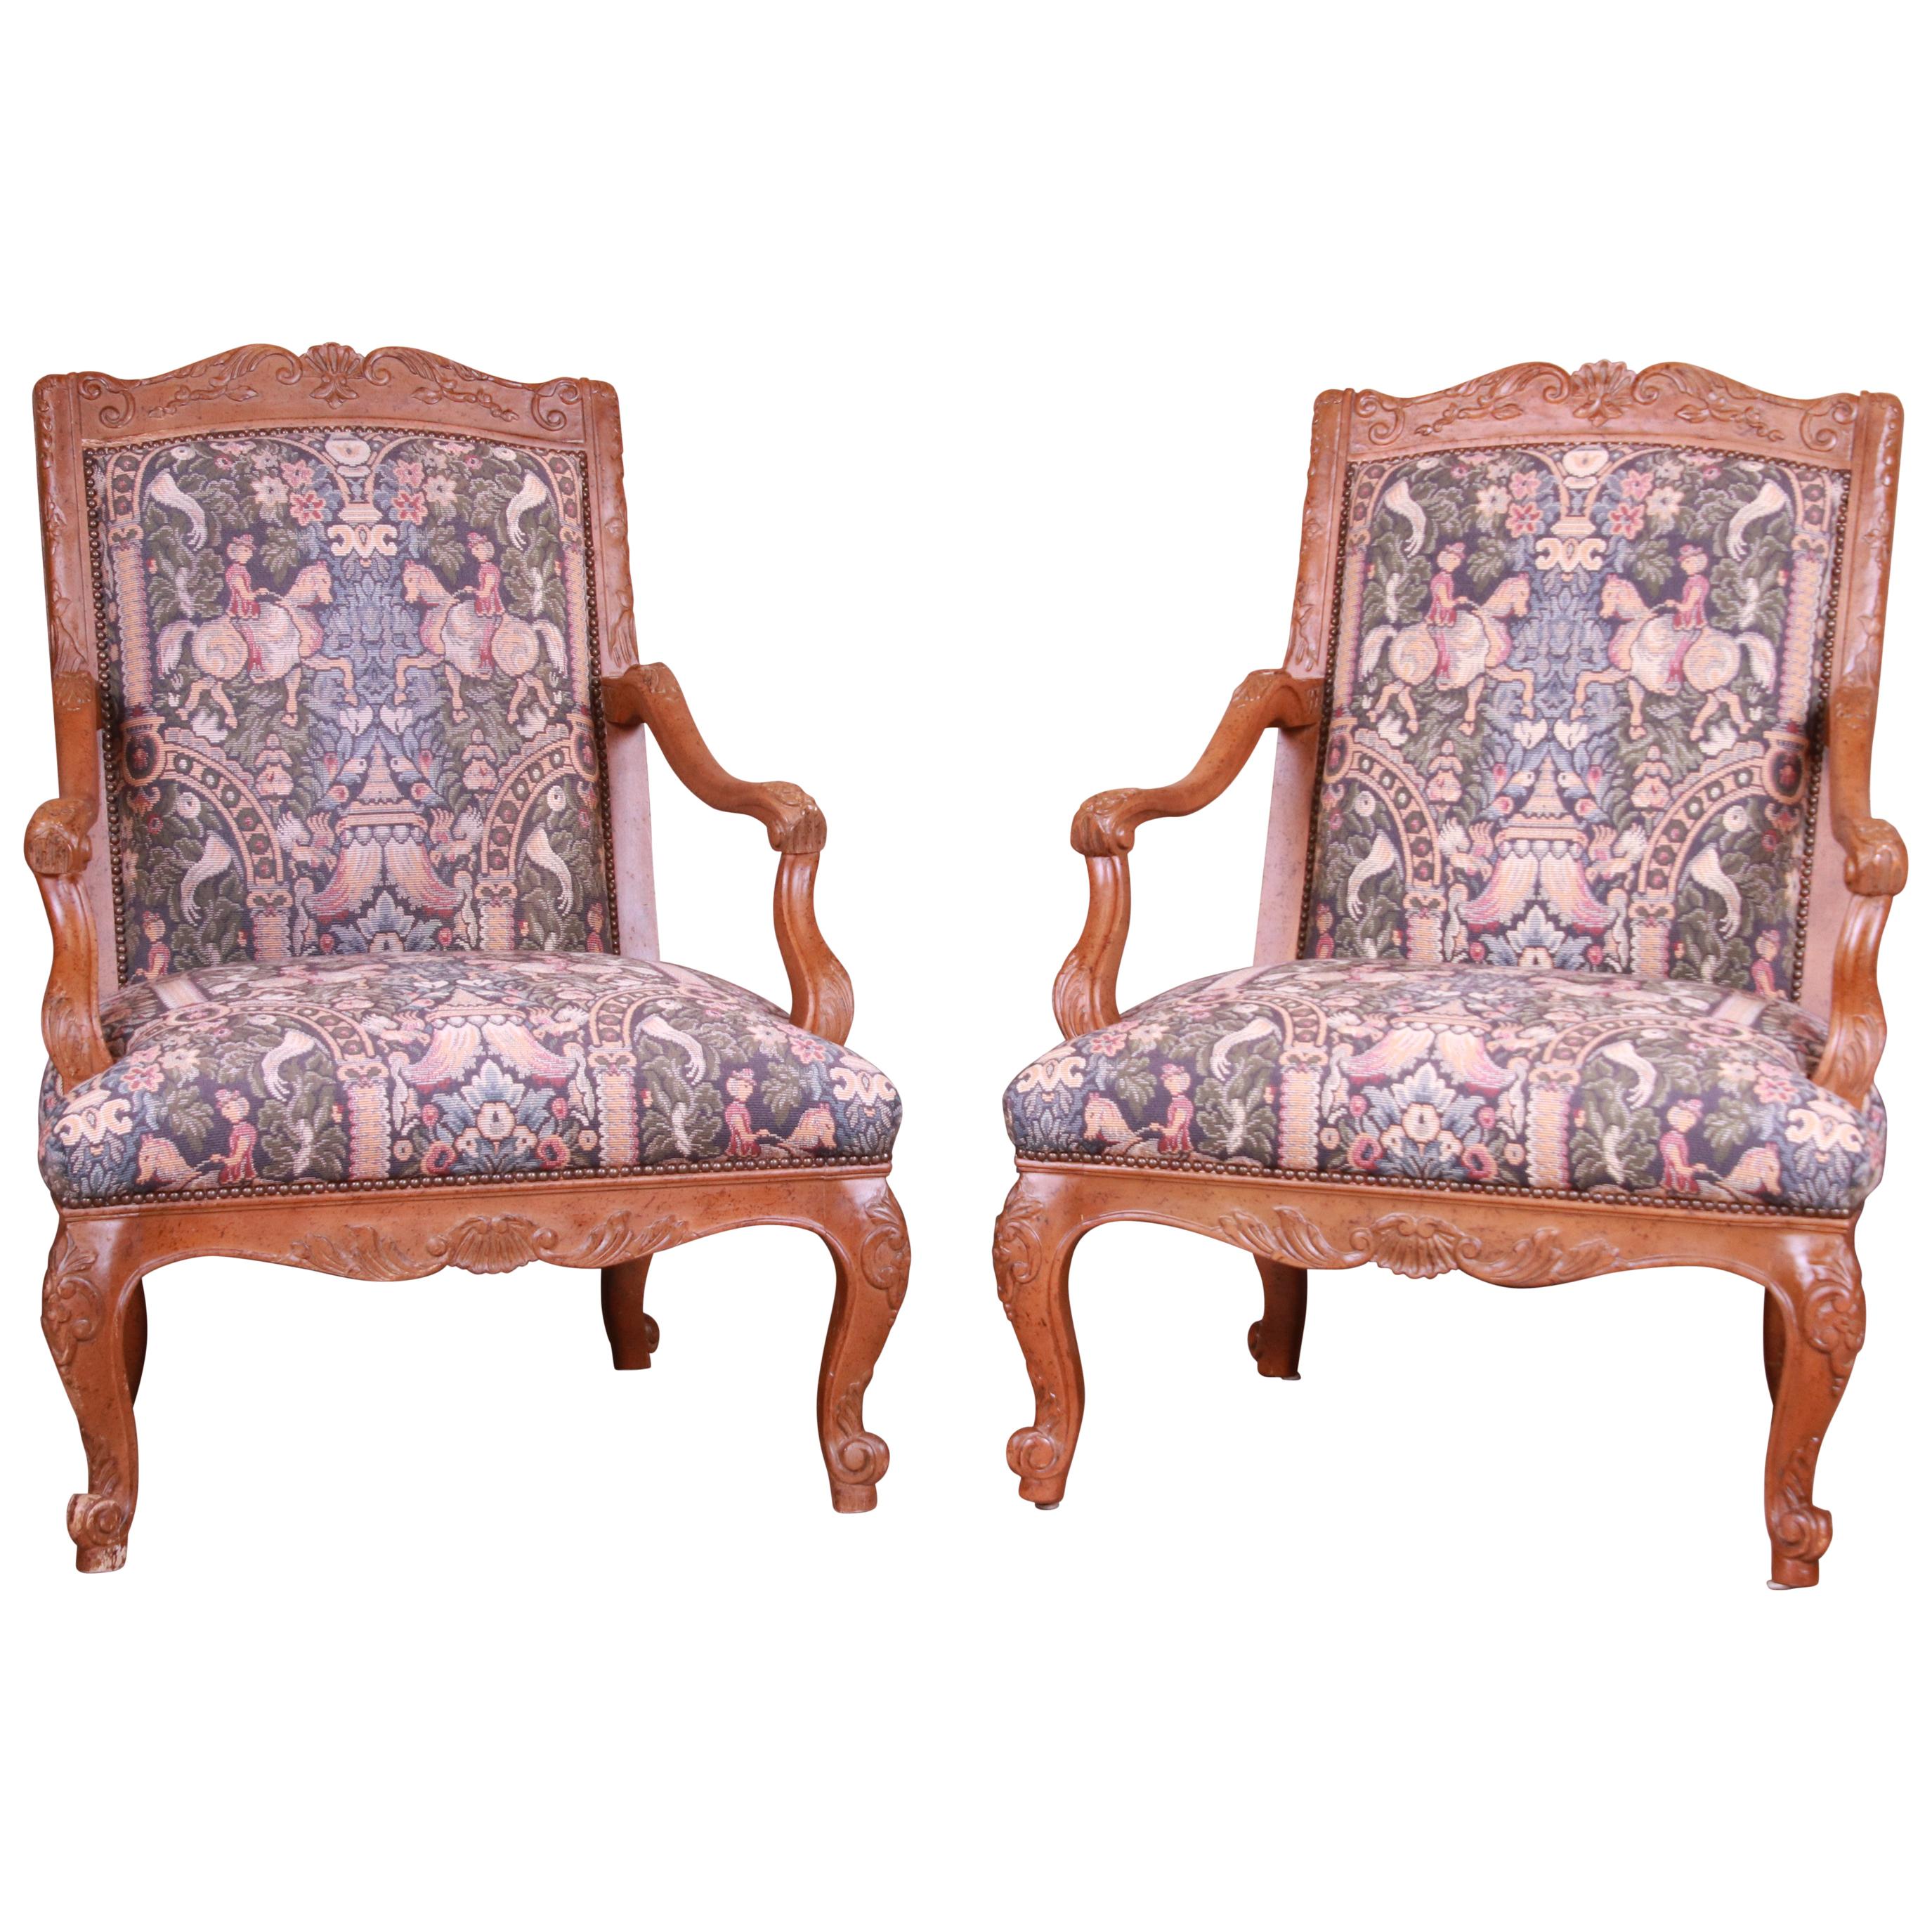 Baker Furniture French Provincial Louis XV Ornate Carved Fauteuils, Pair